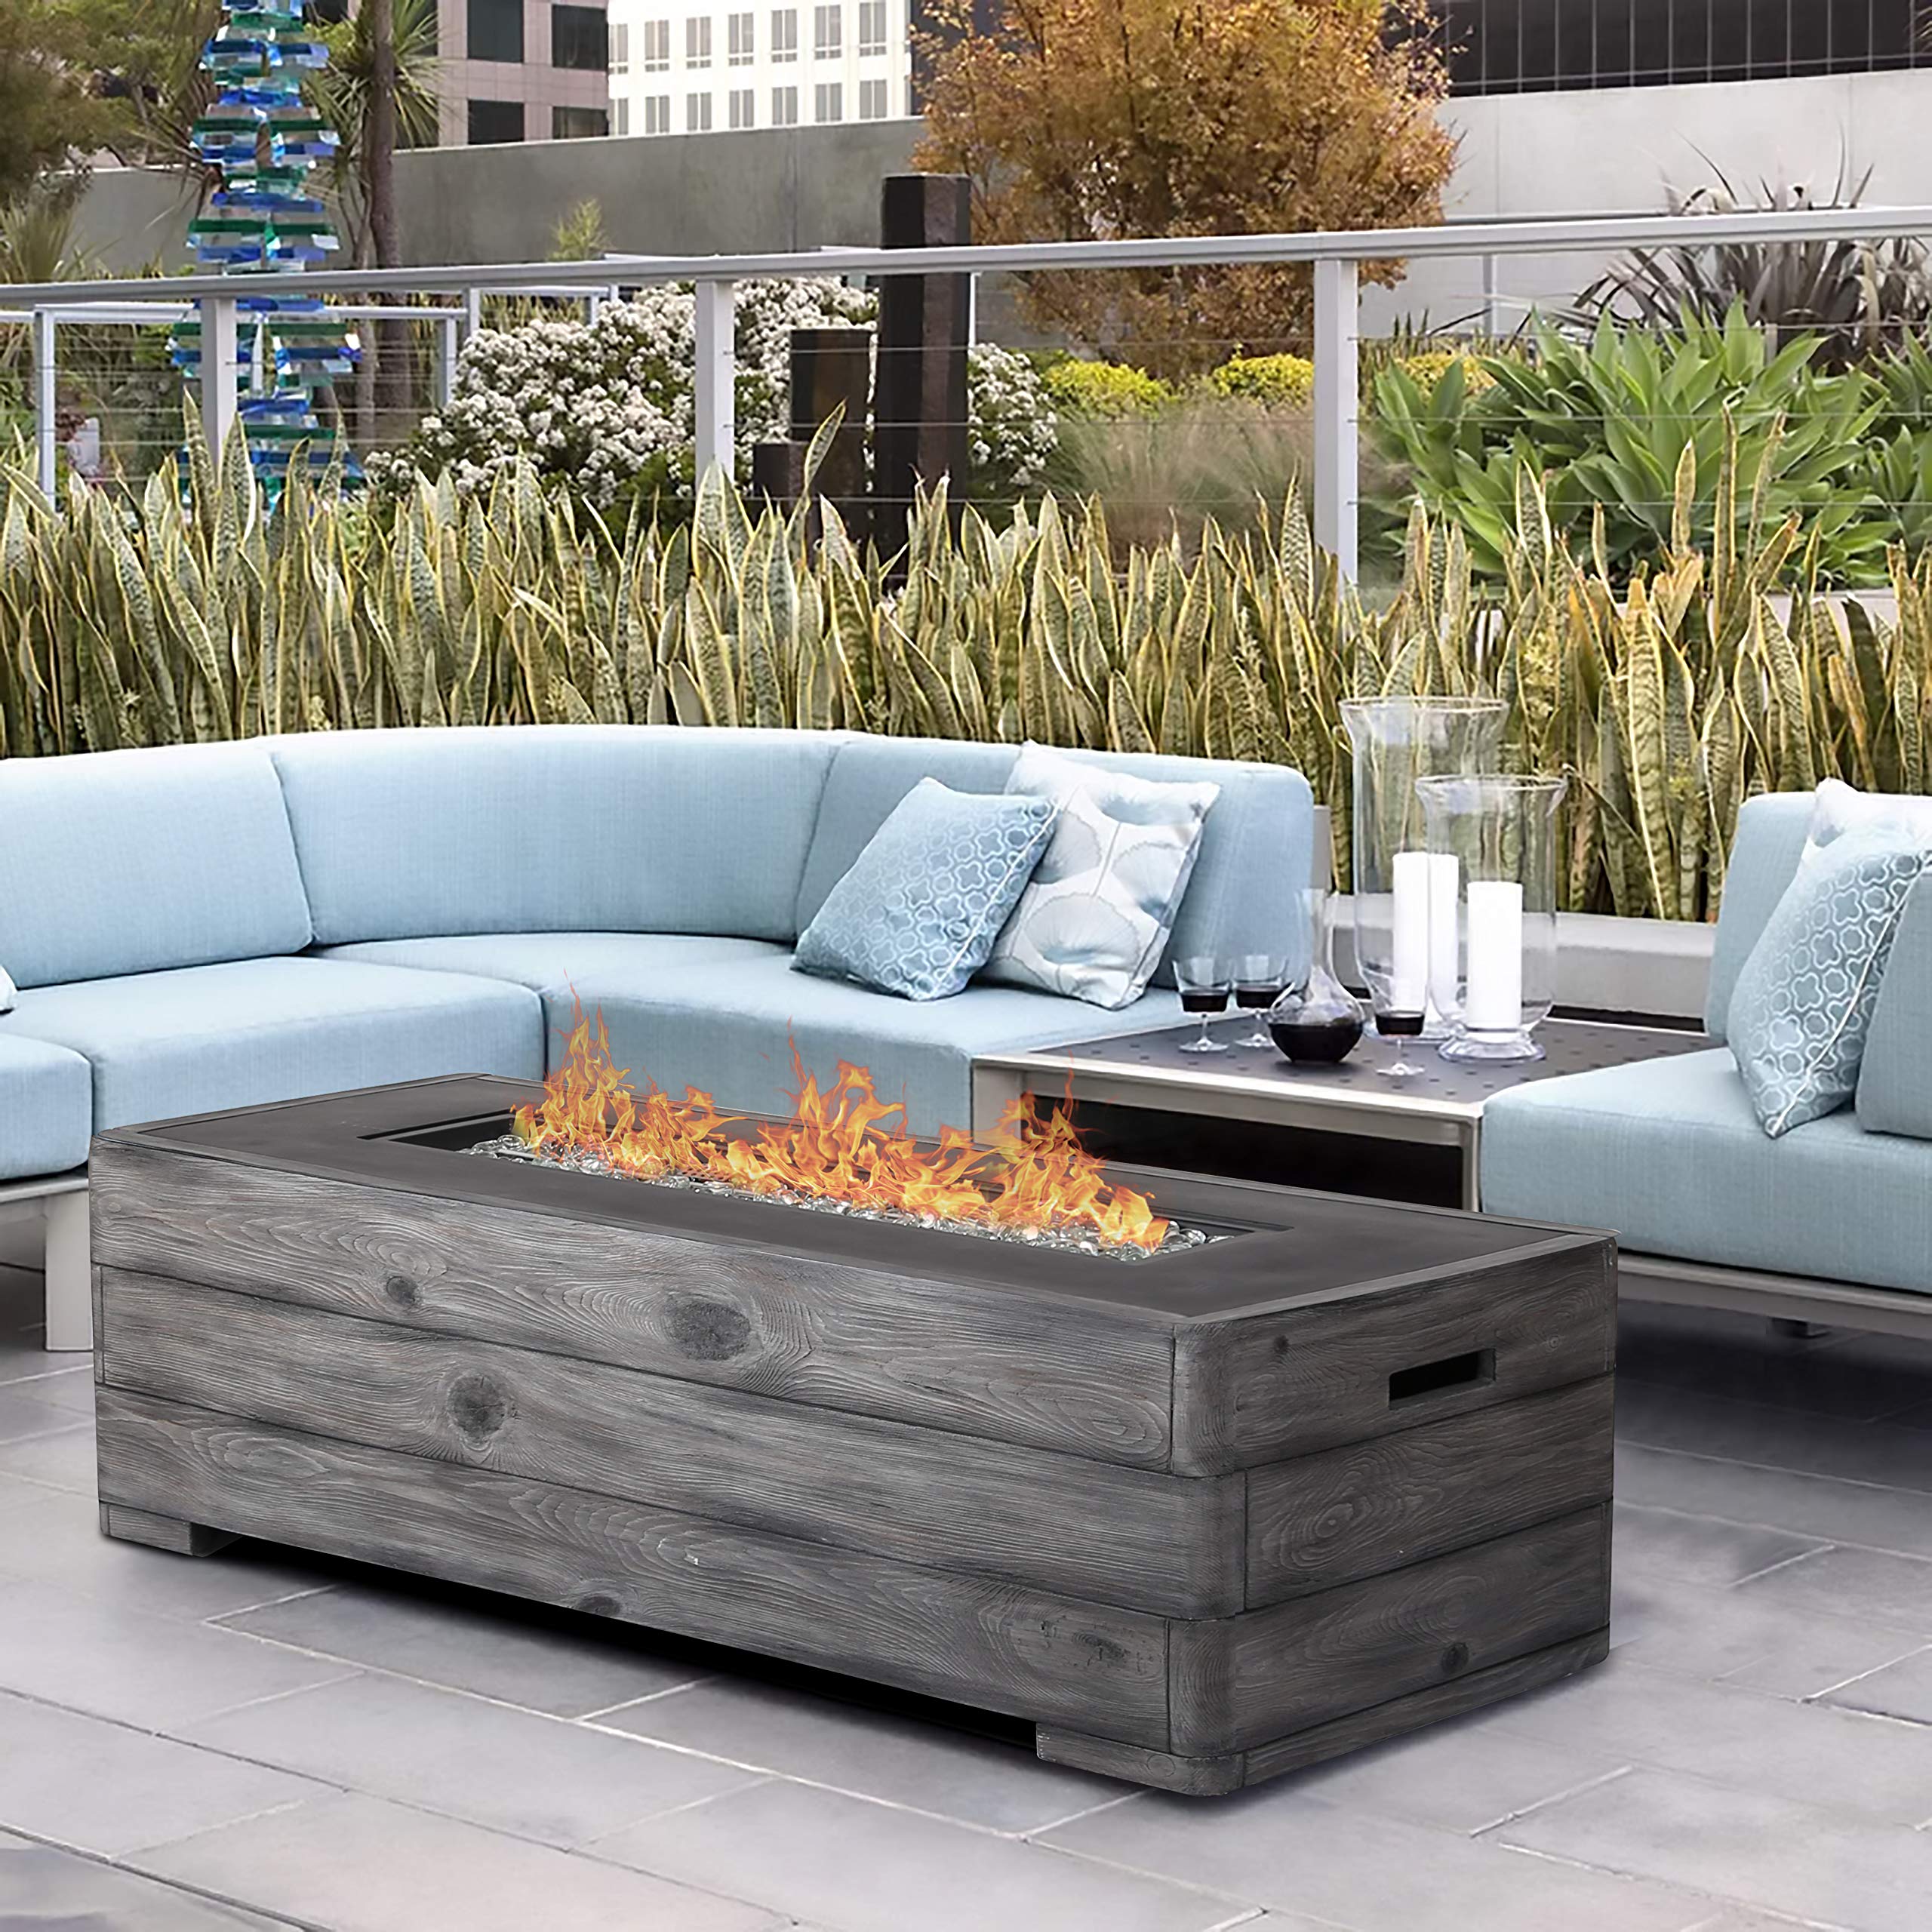 MUPATER 48’’ Patio Propane Gas Fire Pit Table Rectangular with Blue Fire Glass and Cover for Outside, 50000 BTU Auto-Ignition Fire Table Tank Outside Without Tank Cover, 48''L x 20''W x 18.5''H, Grey